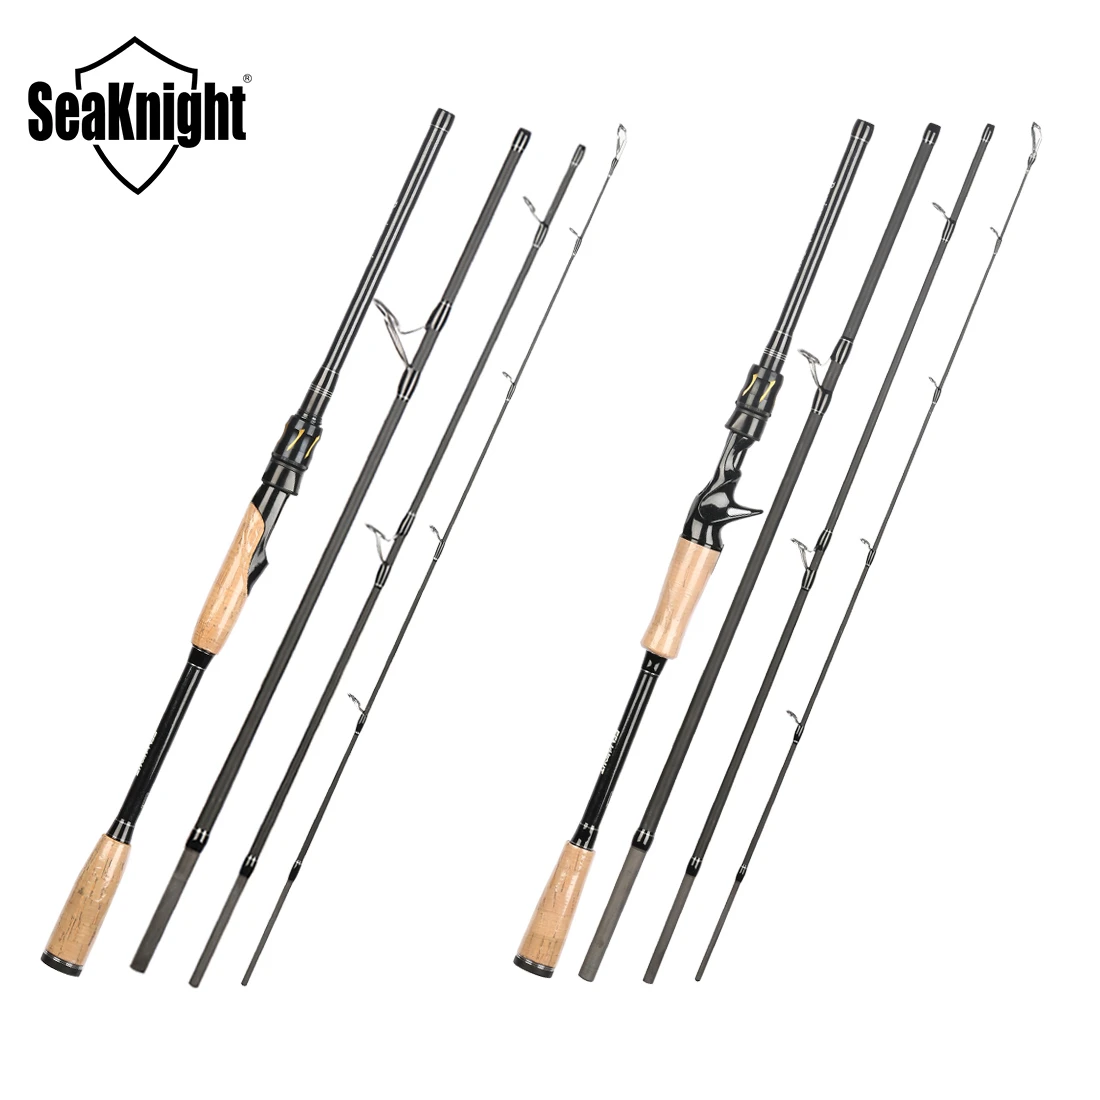 SeaKnight Brand Rapier Series Fishing Rod 1.68M 1.8M 2.1M 2.4M 2.7M 3.0M Carbon Lure Rod Sections Travel Rod for Lure Fishing